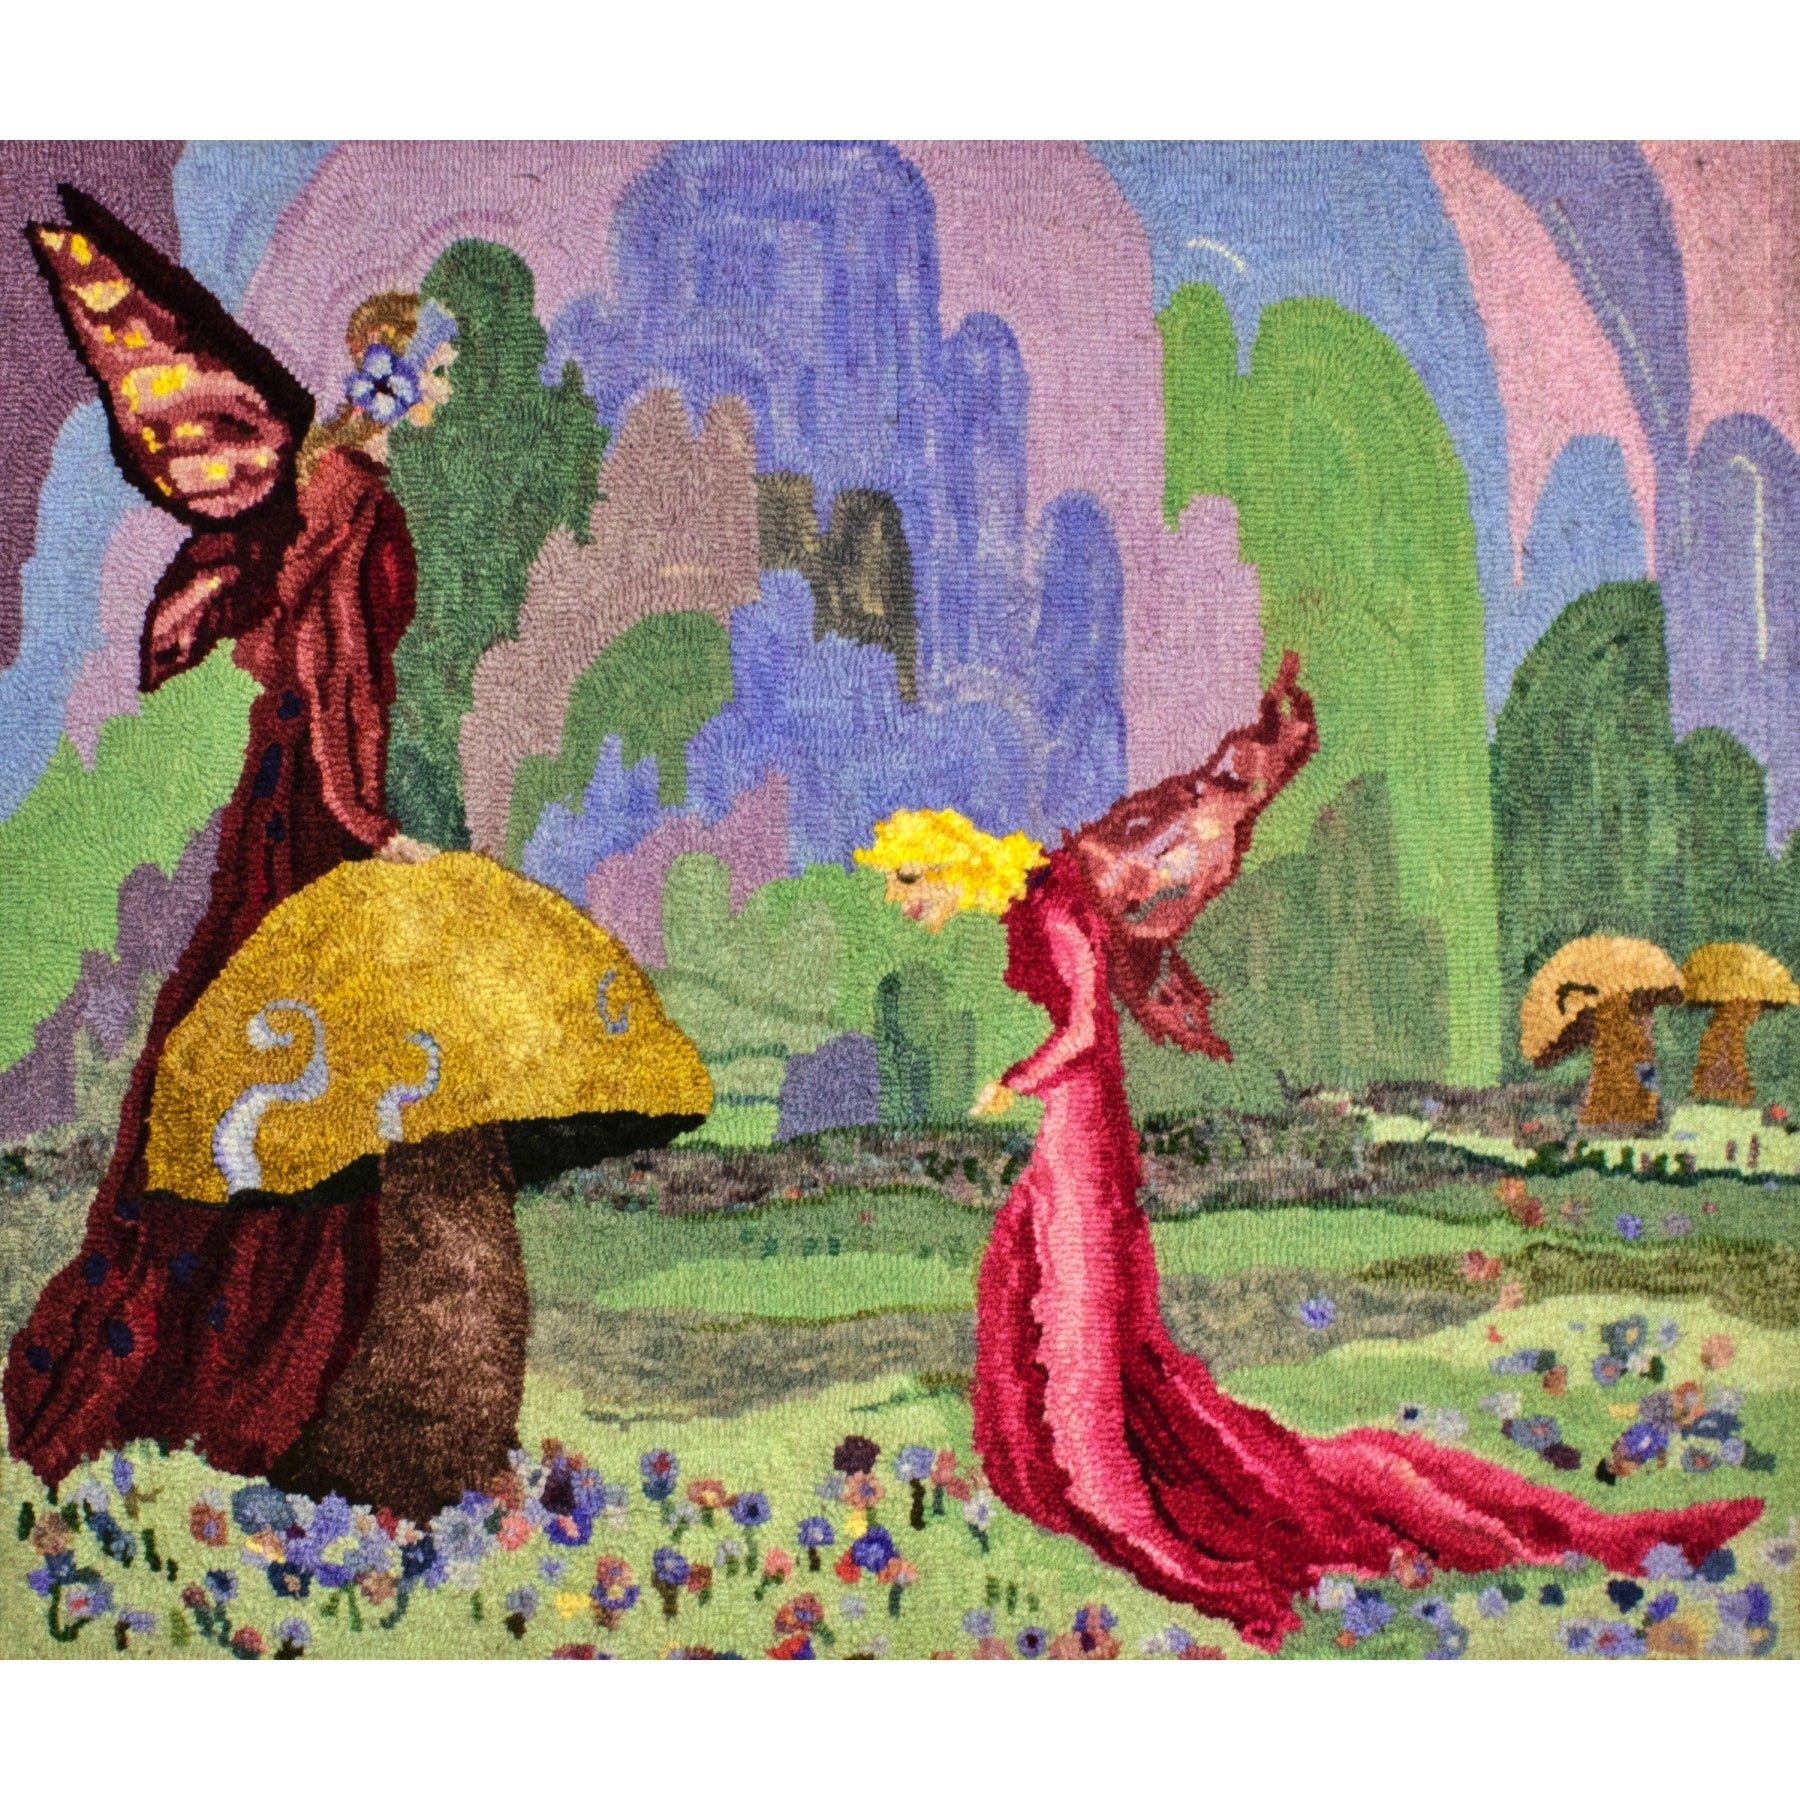 The fairy must give herself up to the queen and loose her power for eight days, ill. Virginia Francis Sterret, 1919, rug hooked by Marty Liptak